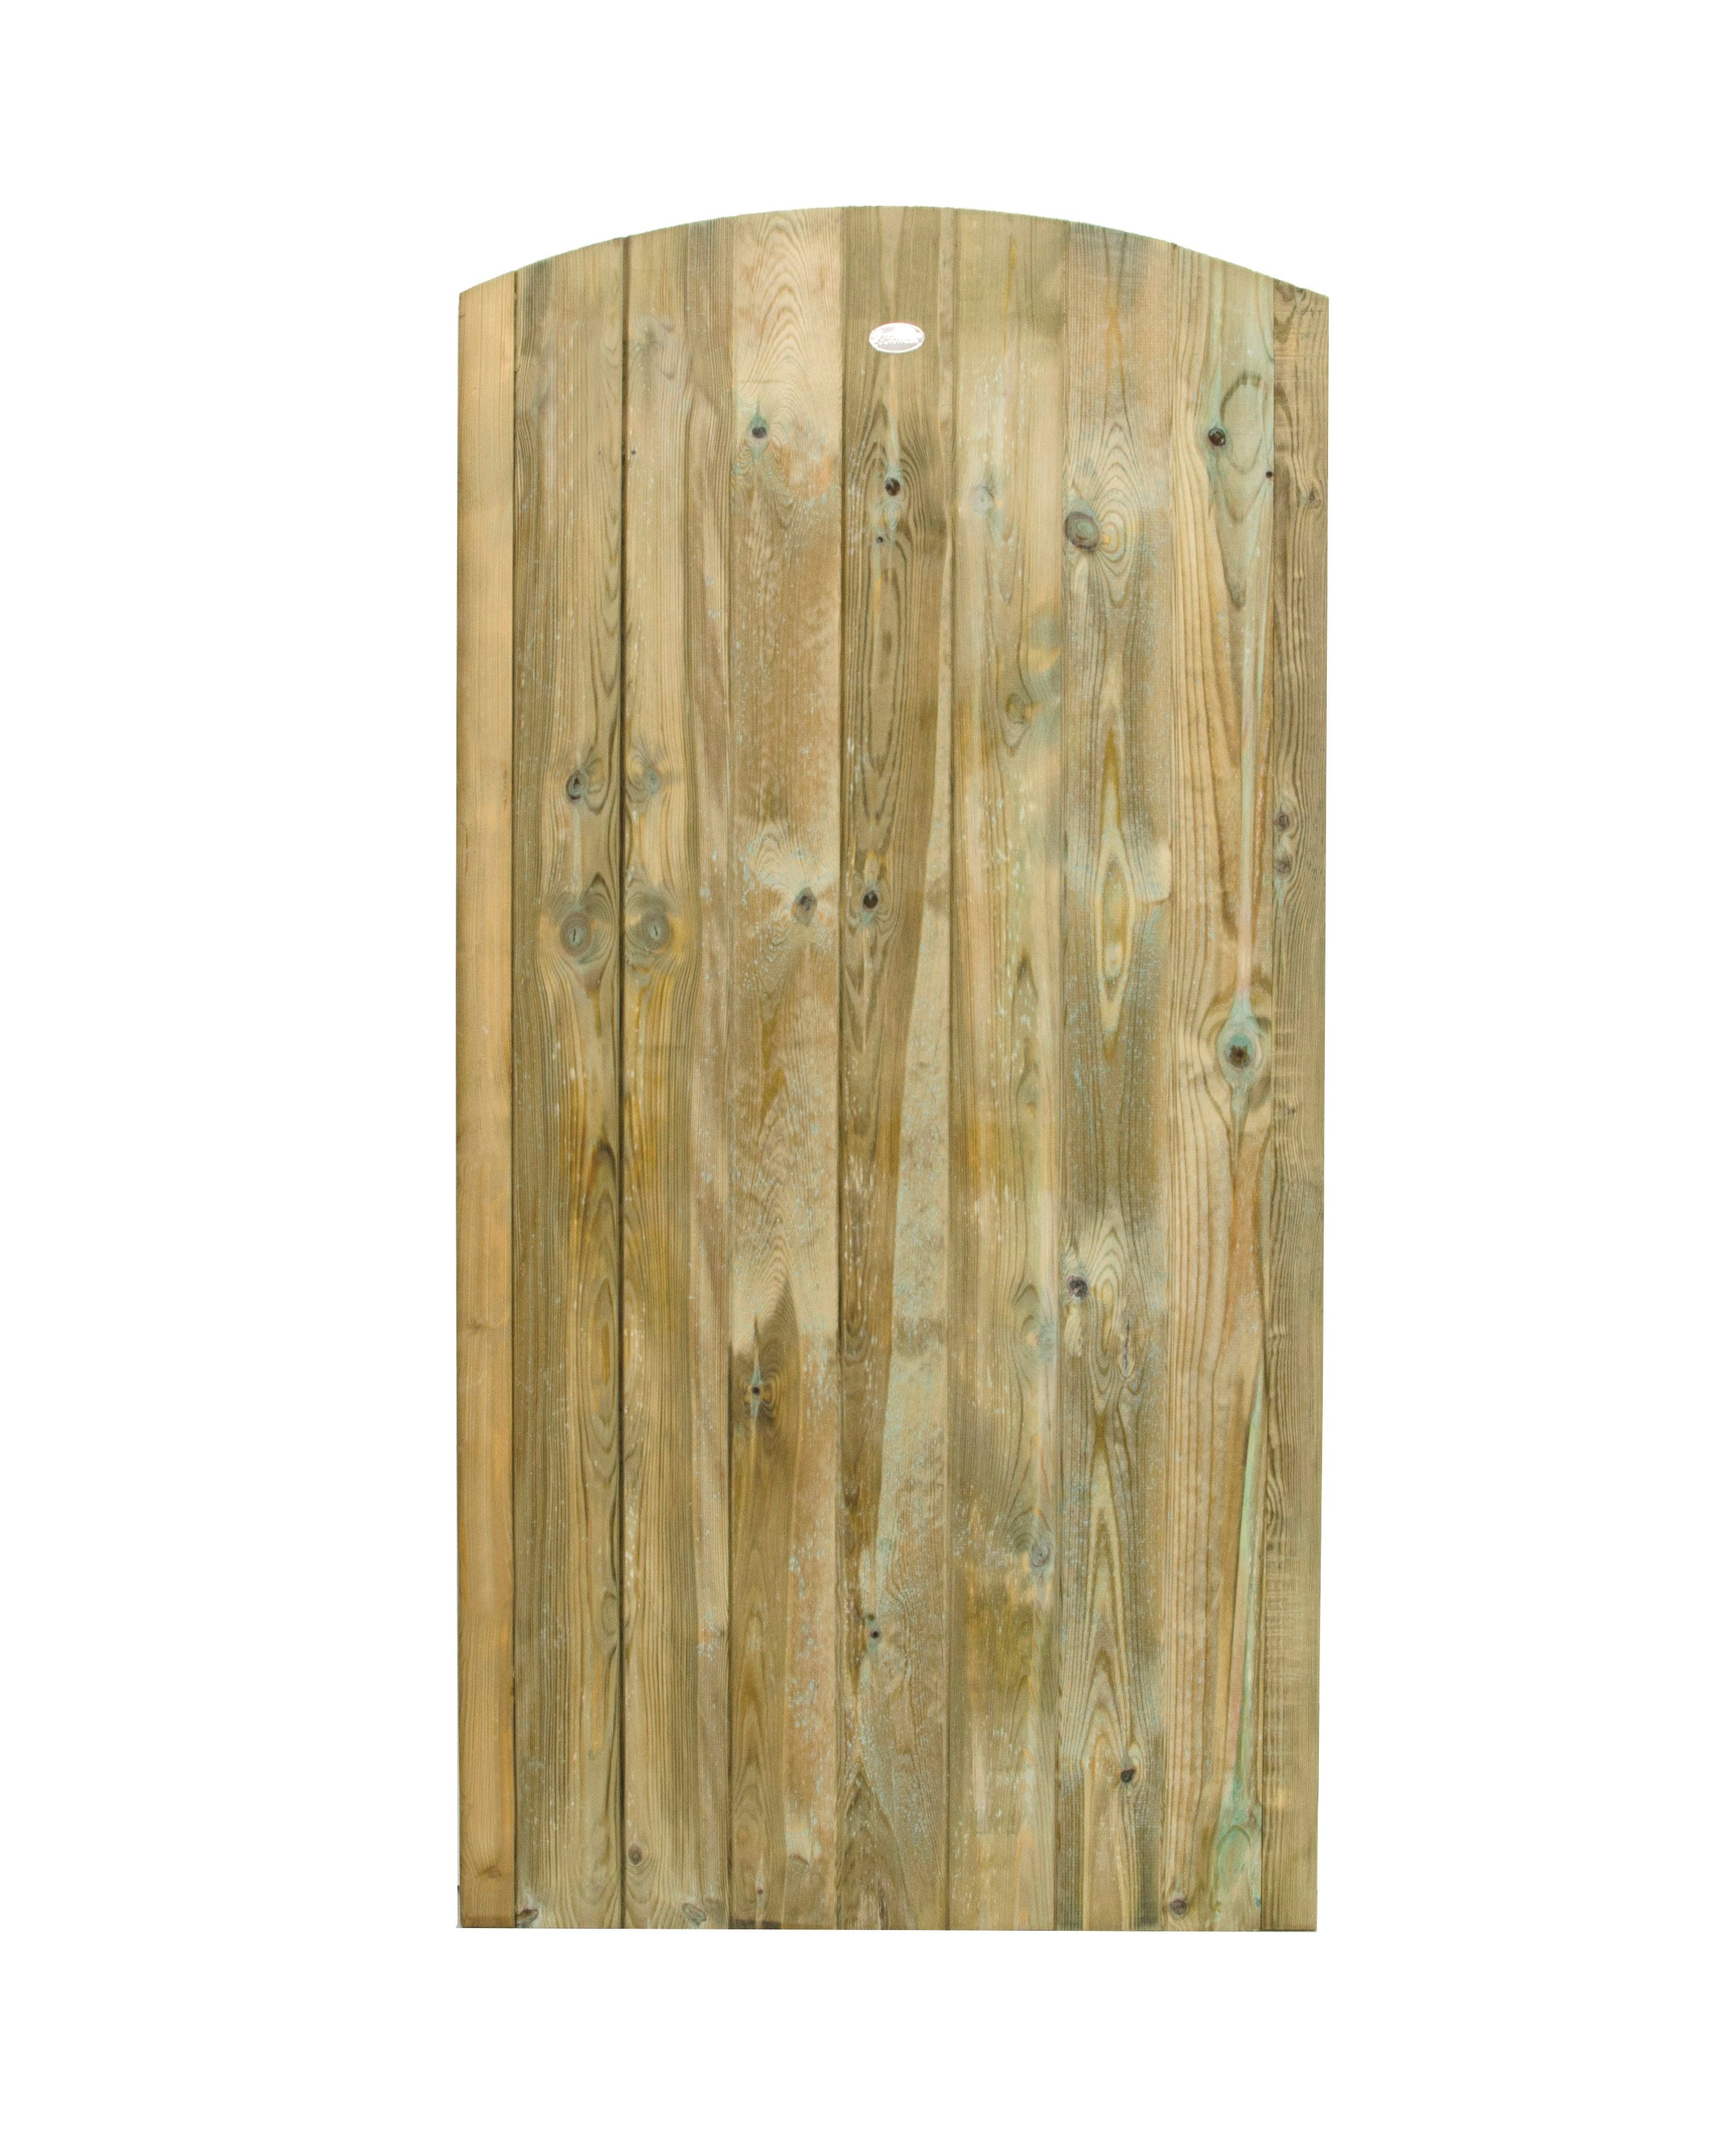 Image of Forest Garden Pressure Treated Curved Top Timber Gate - 900 x 1800 mm